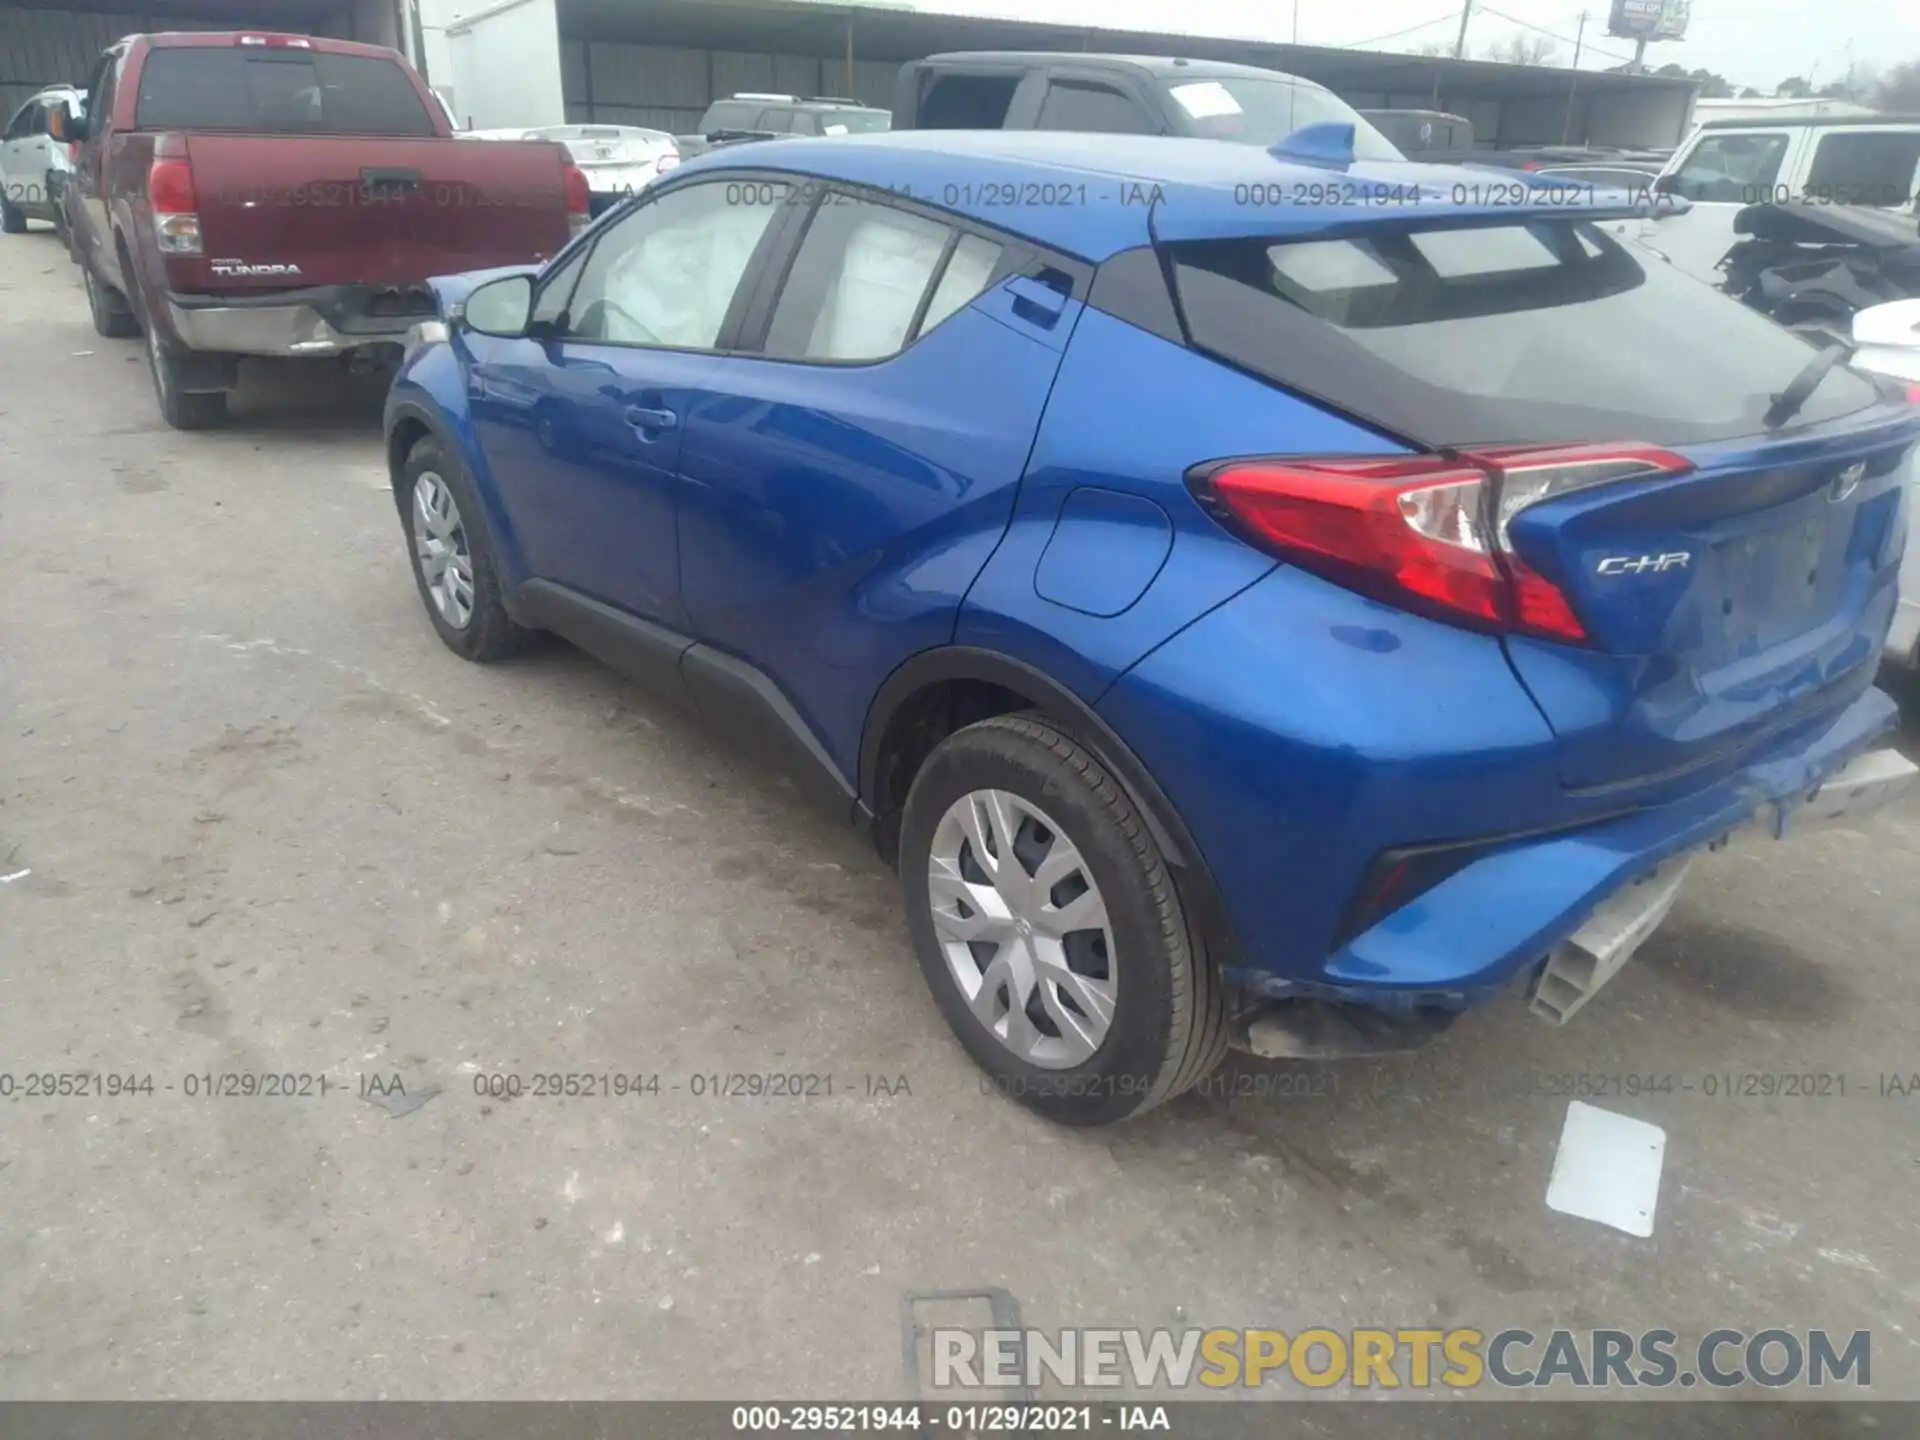 3 Photograph of a damaged car NMTKHMBXXKR081834 TOYOTA C-HR 2019